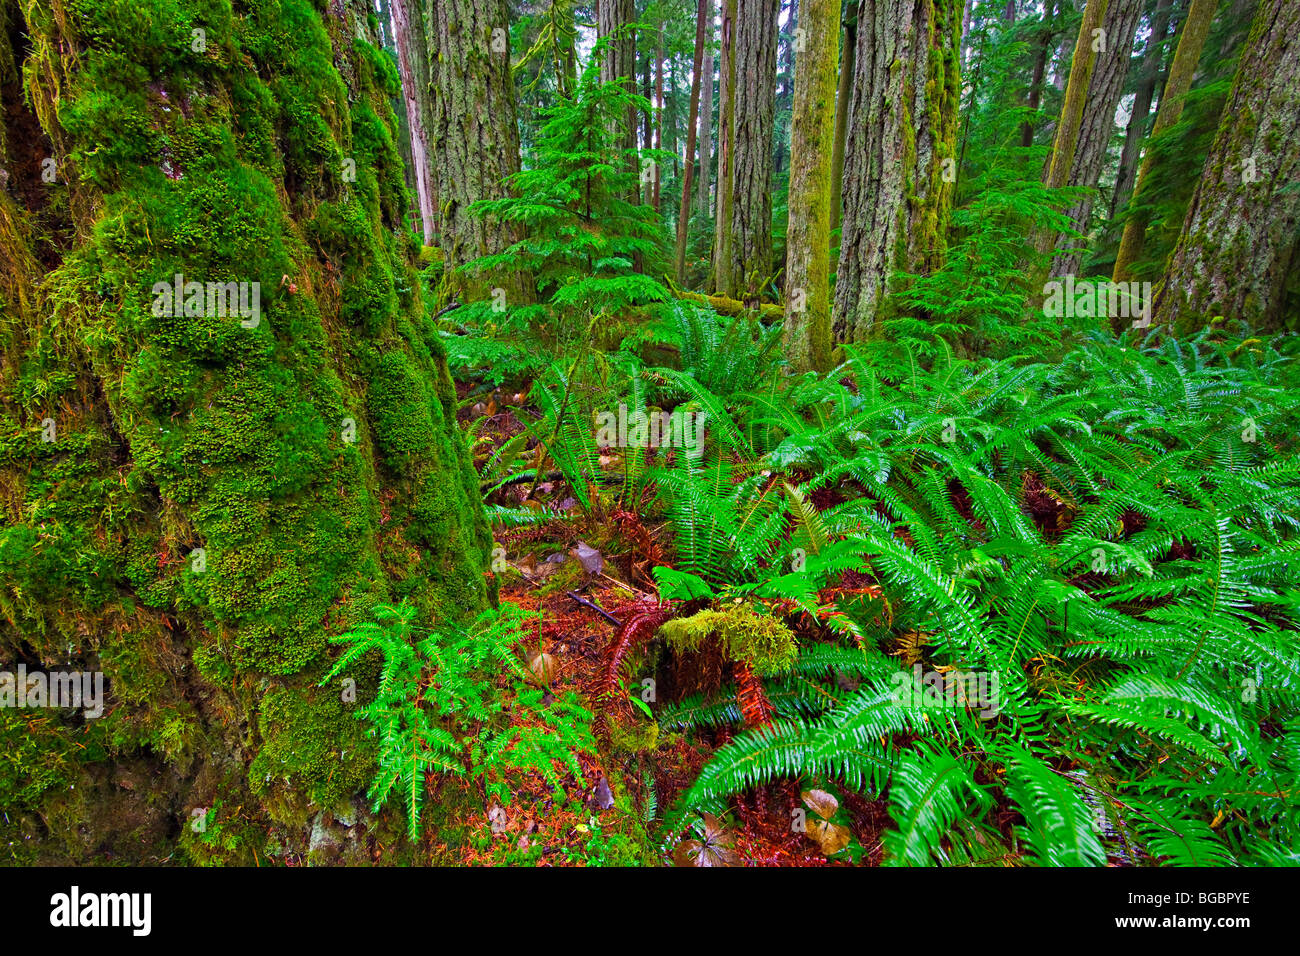 Moss covered trees, and ferns growing in Cathedral Grove Rainforest, MacMillan Provincial Park, Vancouver Island, British Columb Stock Photo